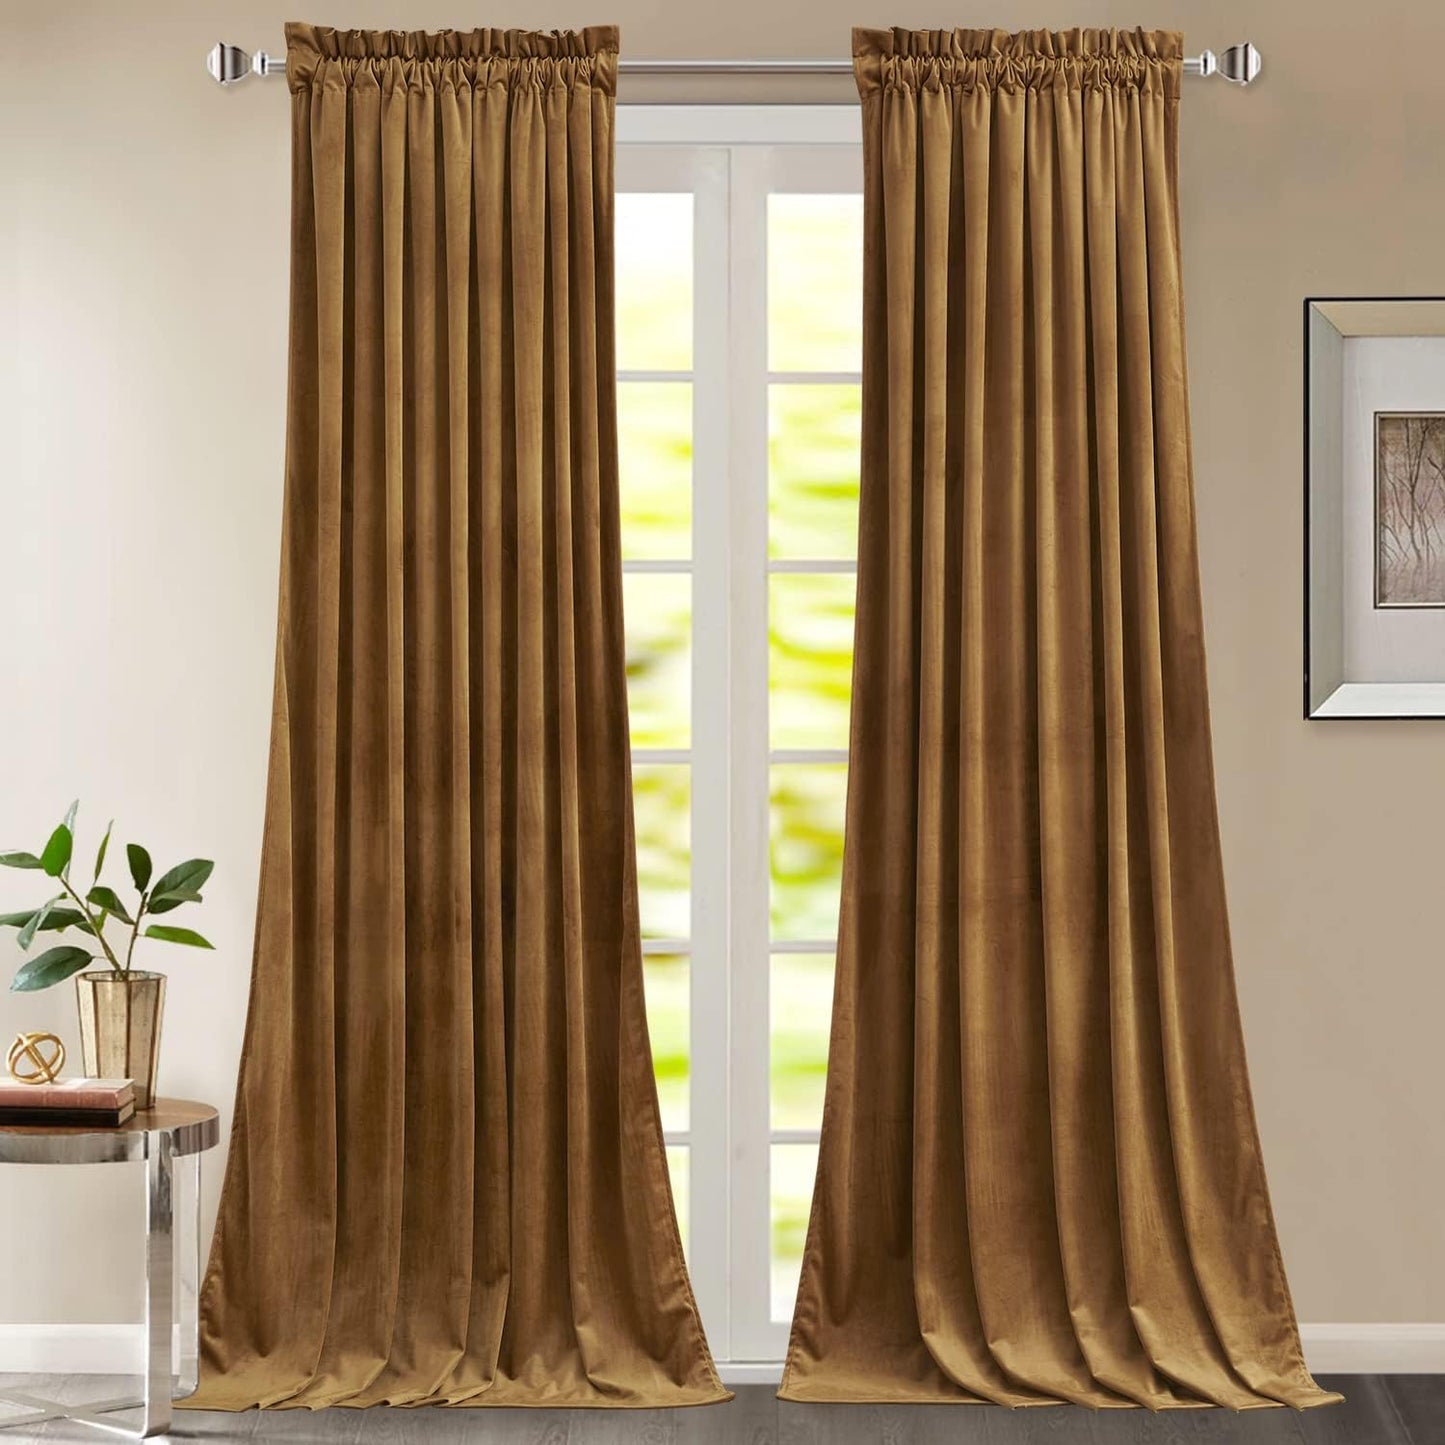 Stangh Theater Red Velvet Curtains - Super Soft Velvet Blackout Insulated Curtain Panels 84 Inches Length for Living Room Holiday Decorative Drapes for Master Bedroom, W52 X L84, 2 Panels  StangH Gold Brown W52" X L96" 